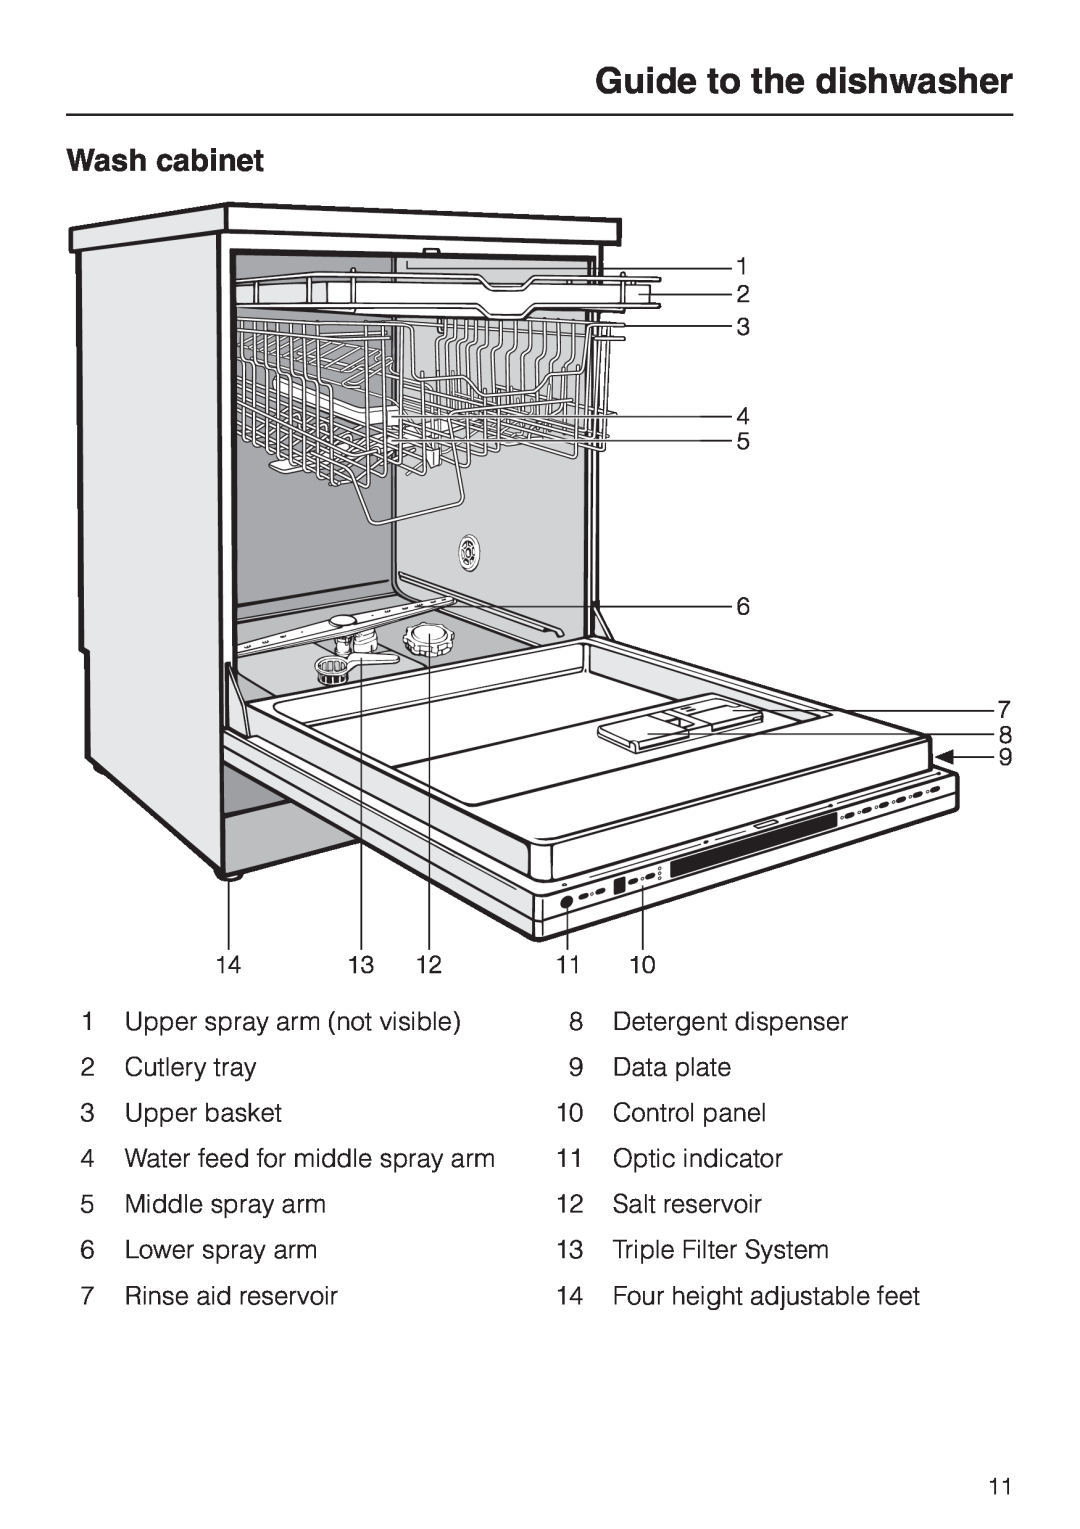 Miele Incognito manual Guide to the dishwasher, Wash cabinet 